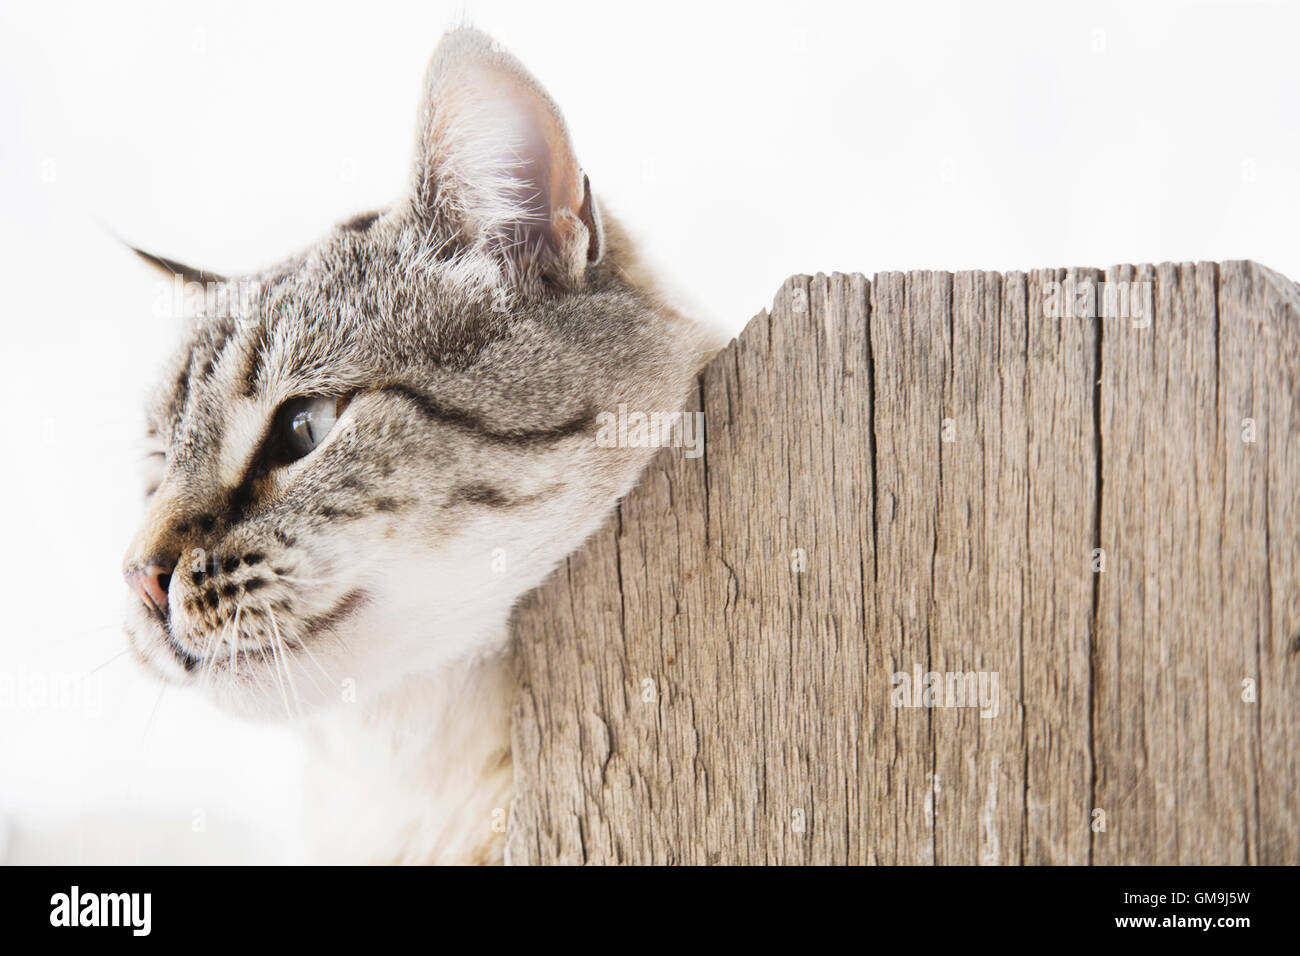 Cat scratching neck on wooden fence Stock Photo